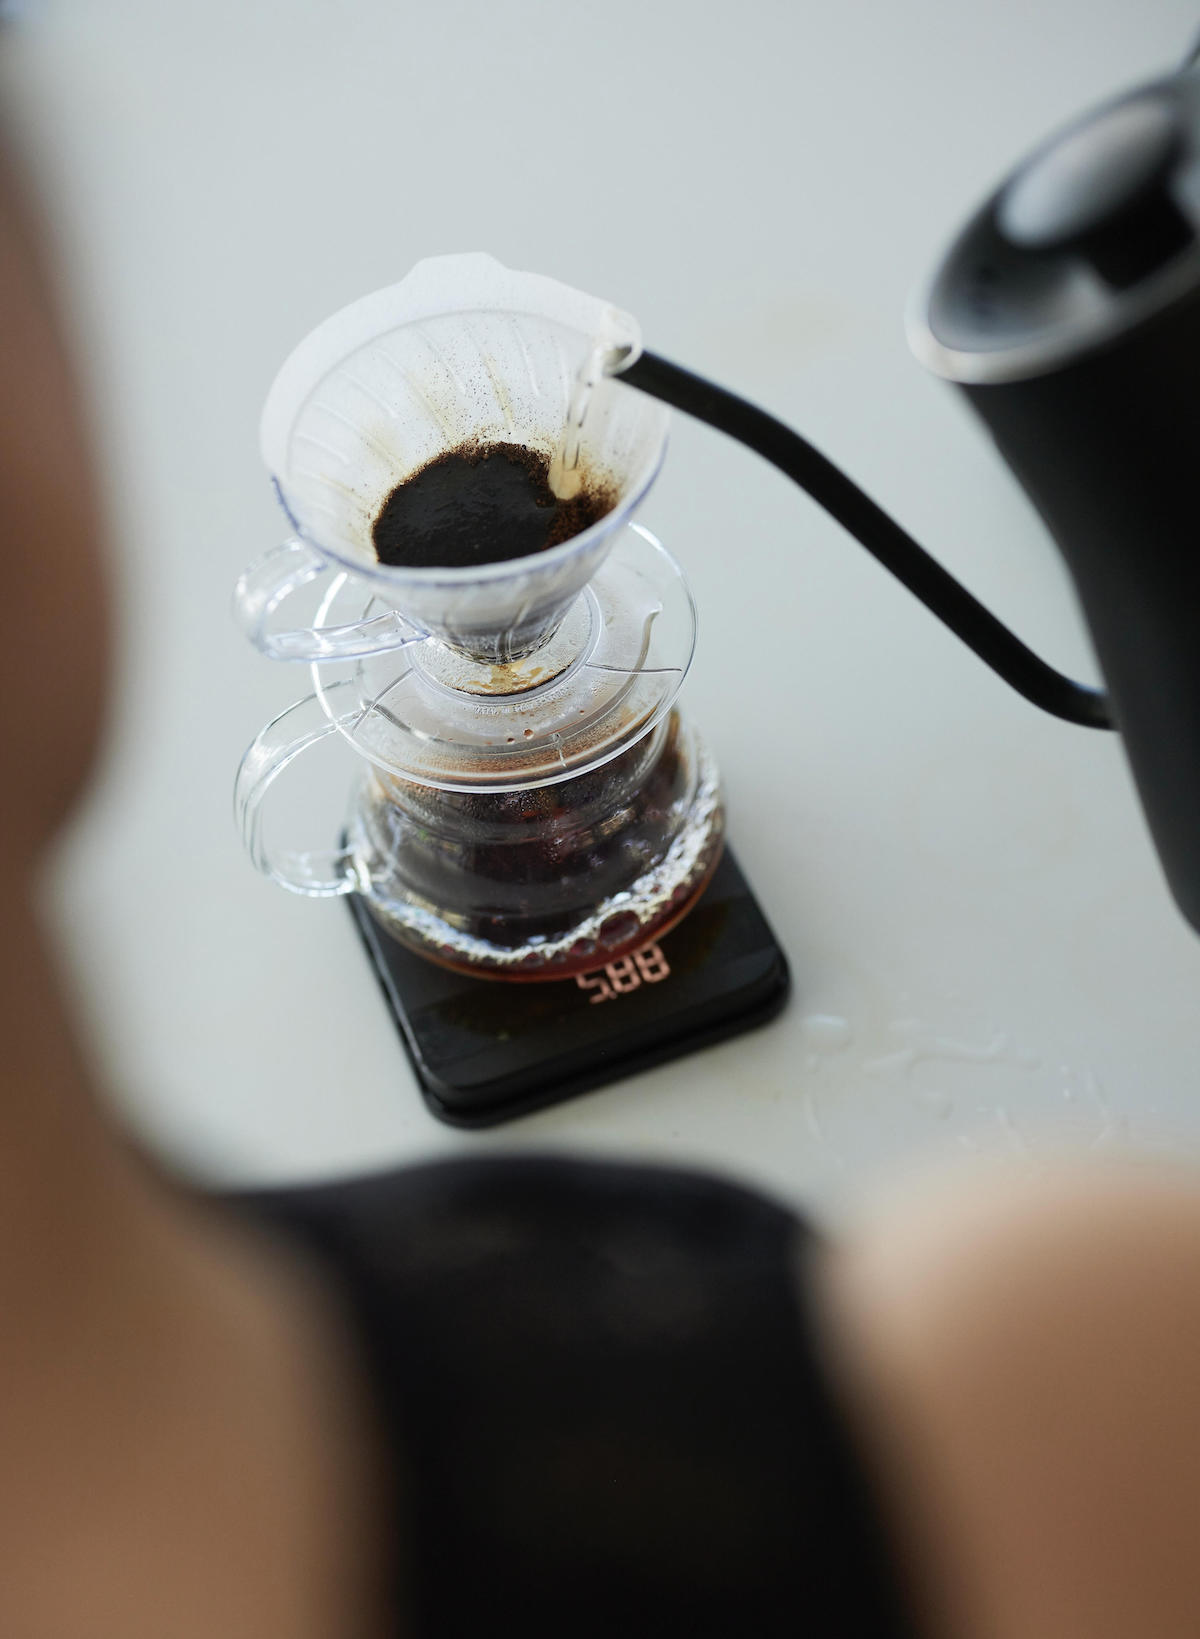 A pesron pours coffee into filter on scale